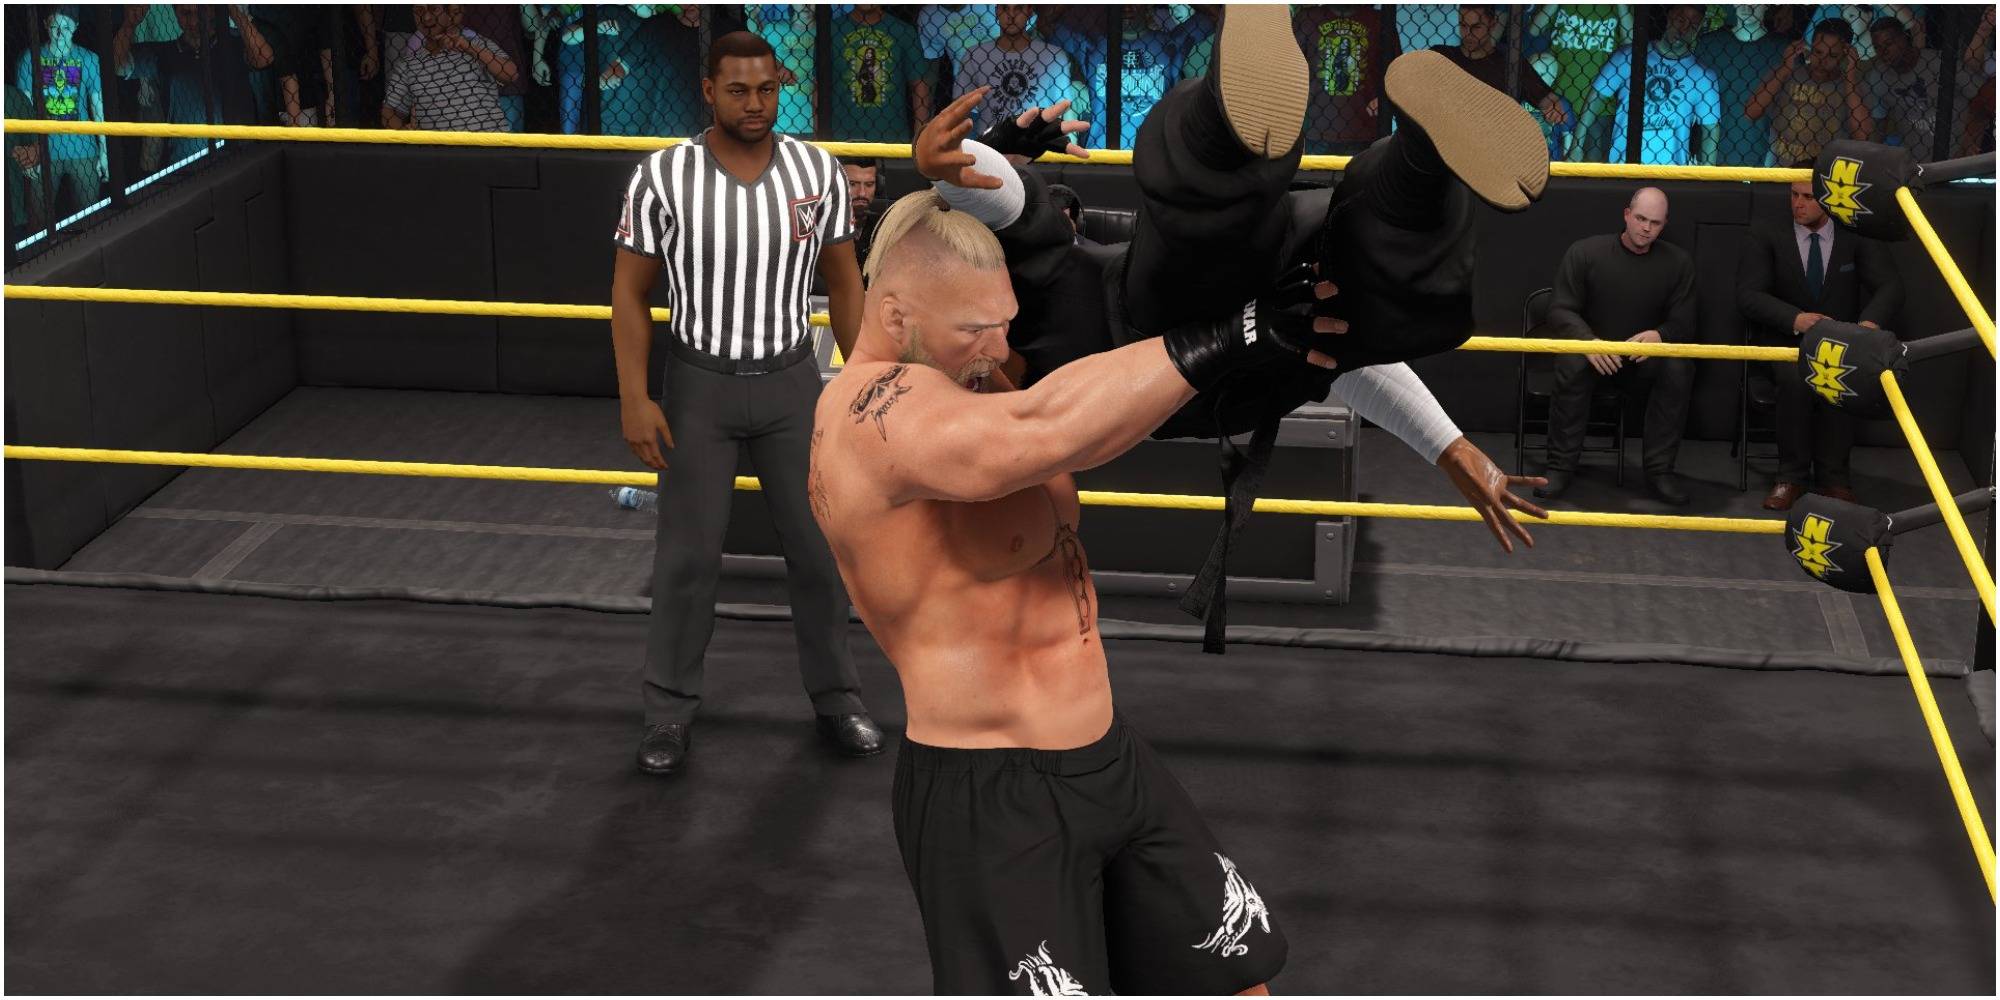 How do you do finishers in wwe 2k15?